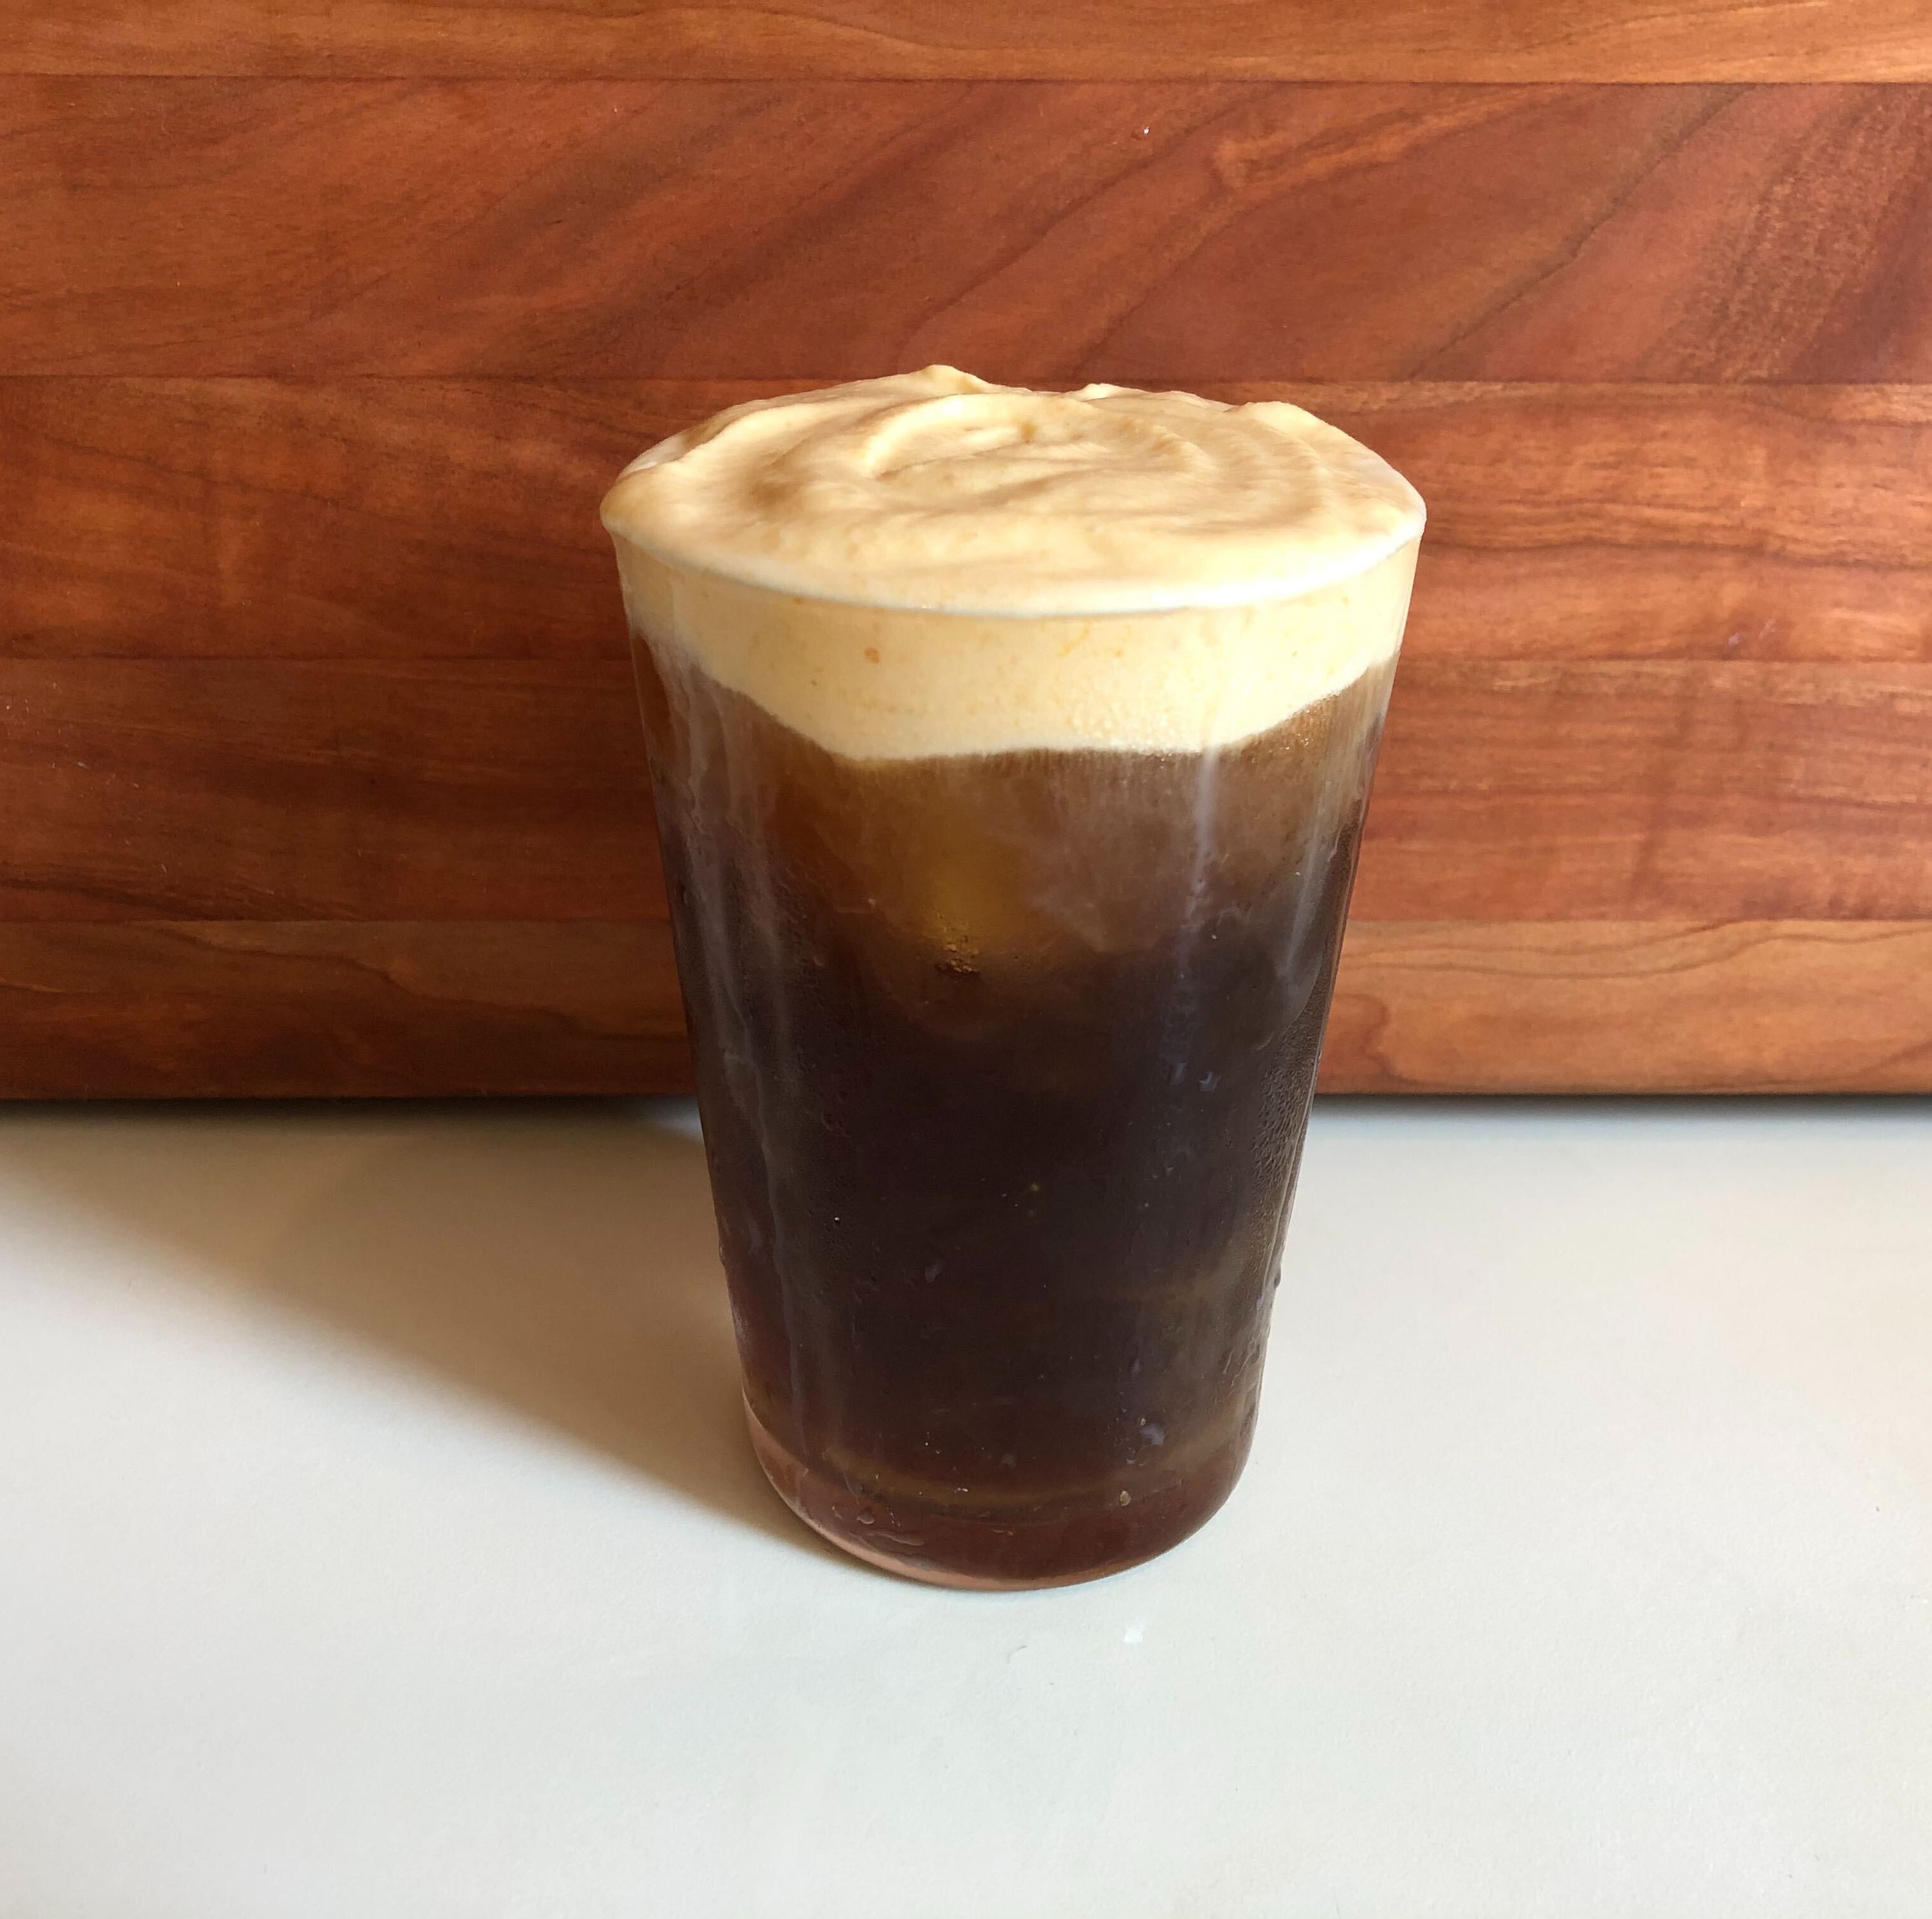 Starbucks Copycat Pumpkin Cream Cold Brew Will Hold You Over Until Fall